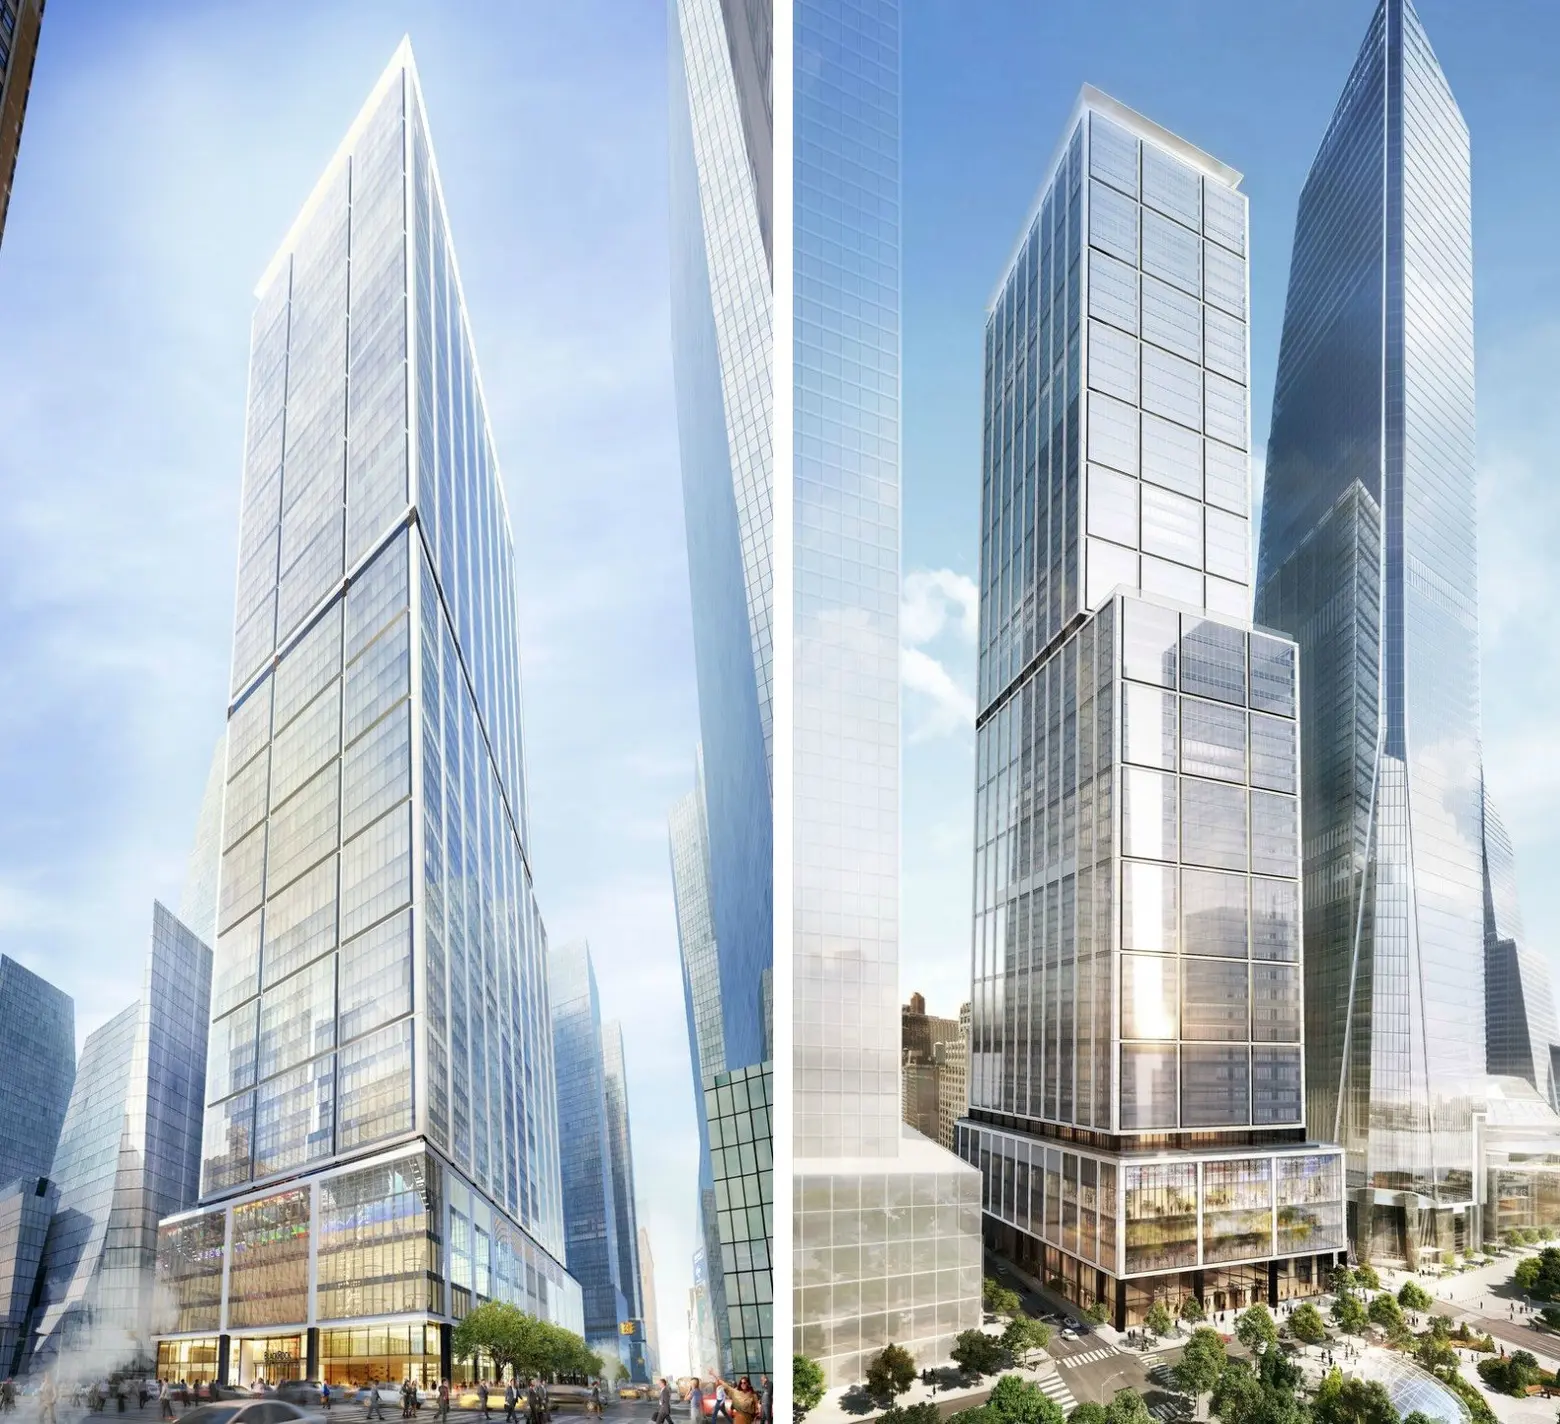 Norman Foster’s 50 Hudson Yards will be city’s most expensive office building at $4B